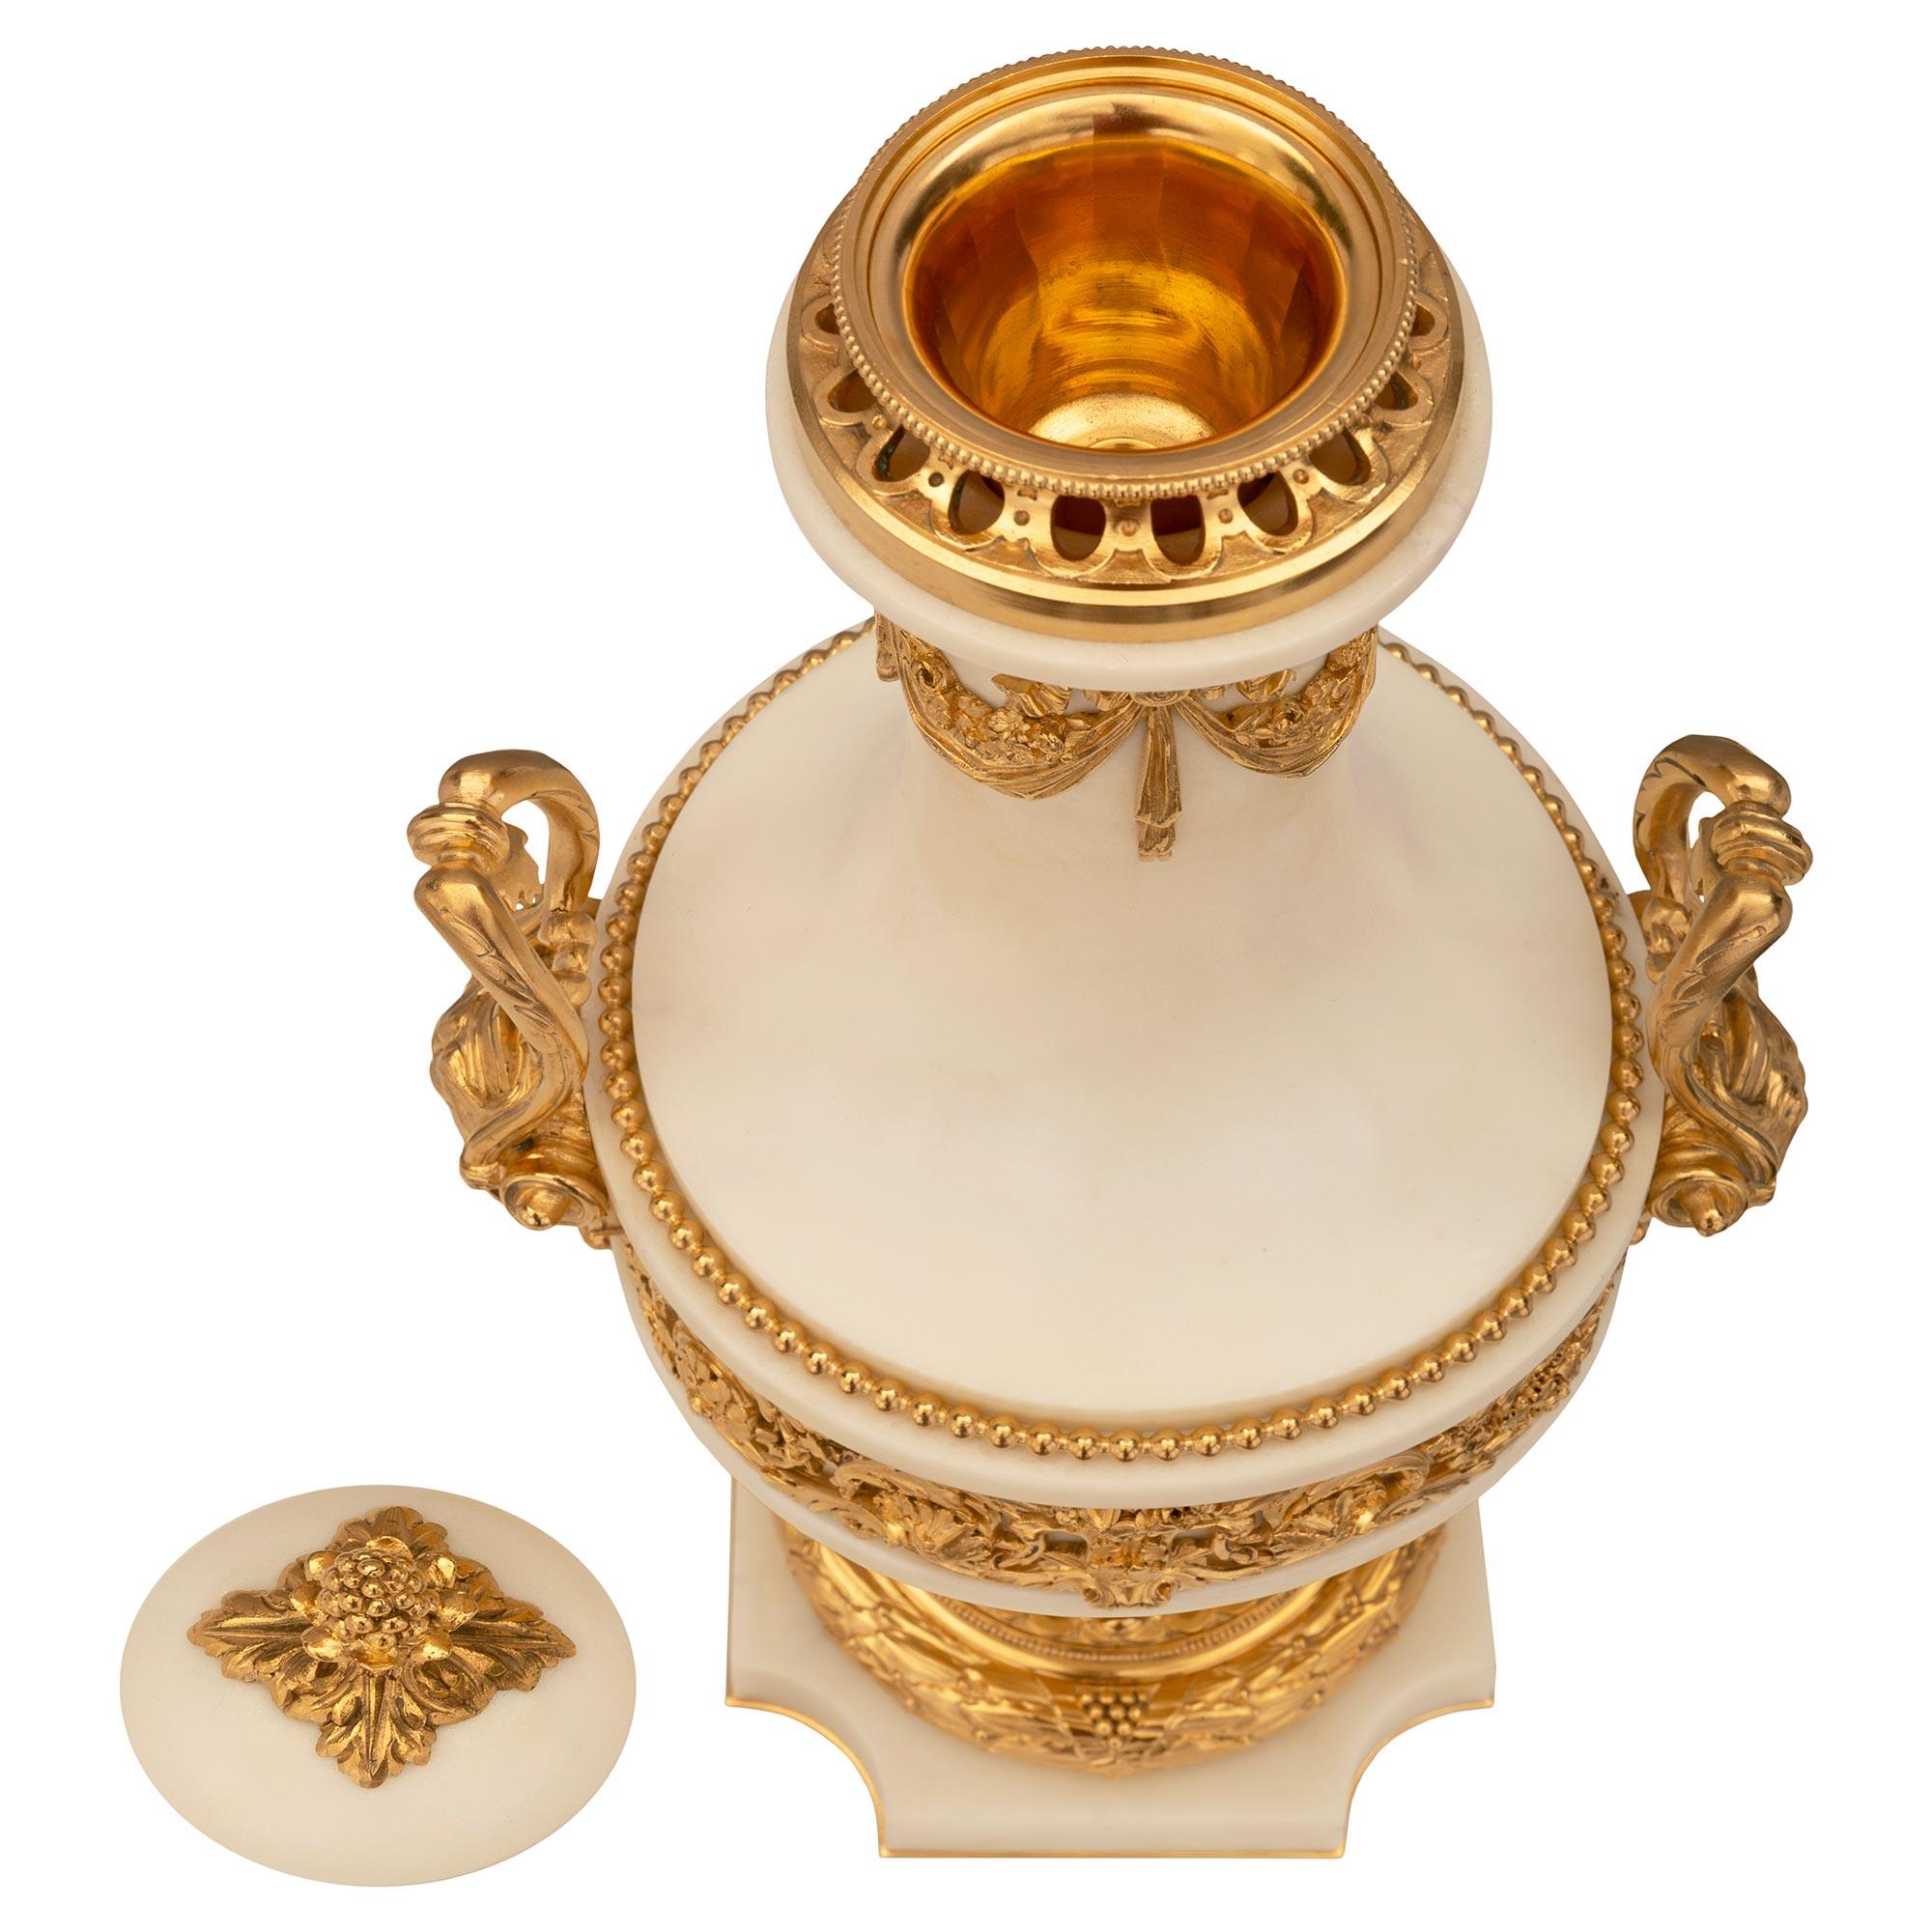 An exceptional and very high quality pair of French 19th century Louis XVI st. Belle Époque period white Carrara marble and ormolu lidded urns. Each urn is raised by a square base with concave corners and a fine bottom ormolu fillet. The socle